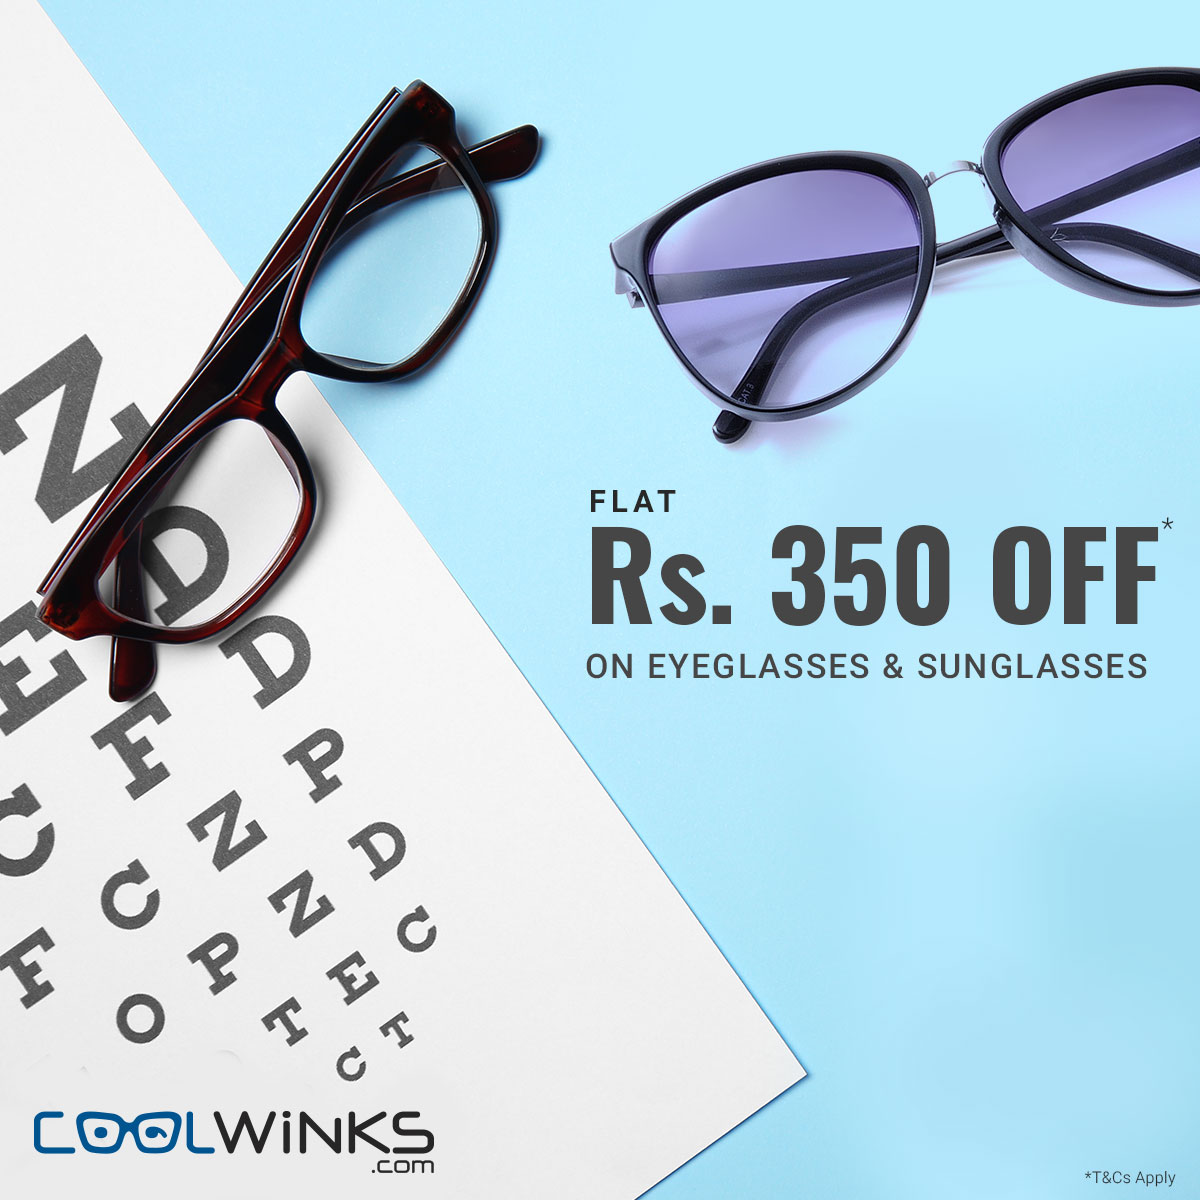 CoolWinks - Show your #swag with the #vintage touch. Get the timeless  collection of #Sunglasses with #Retro Square, #Round & #Clubmaster frames  from #Coolwinks and always be at the top of your #